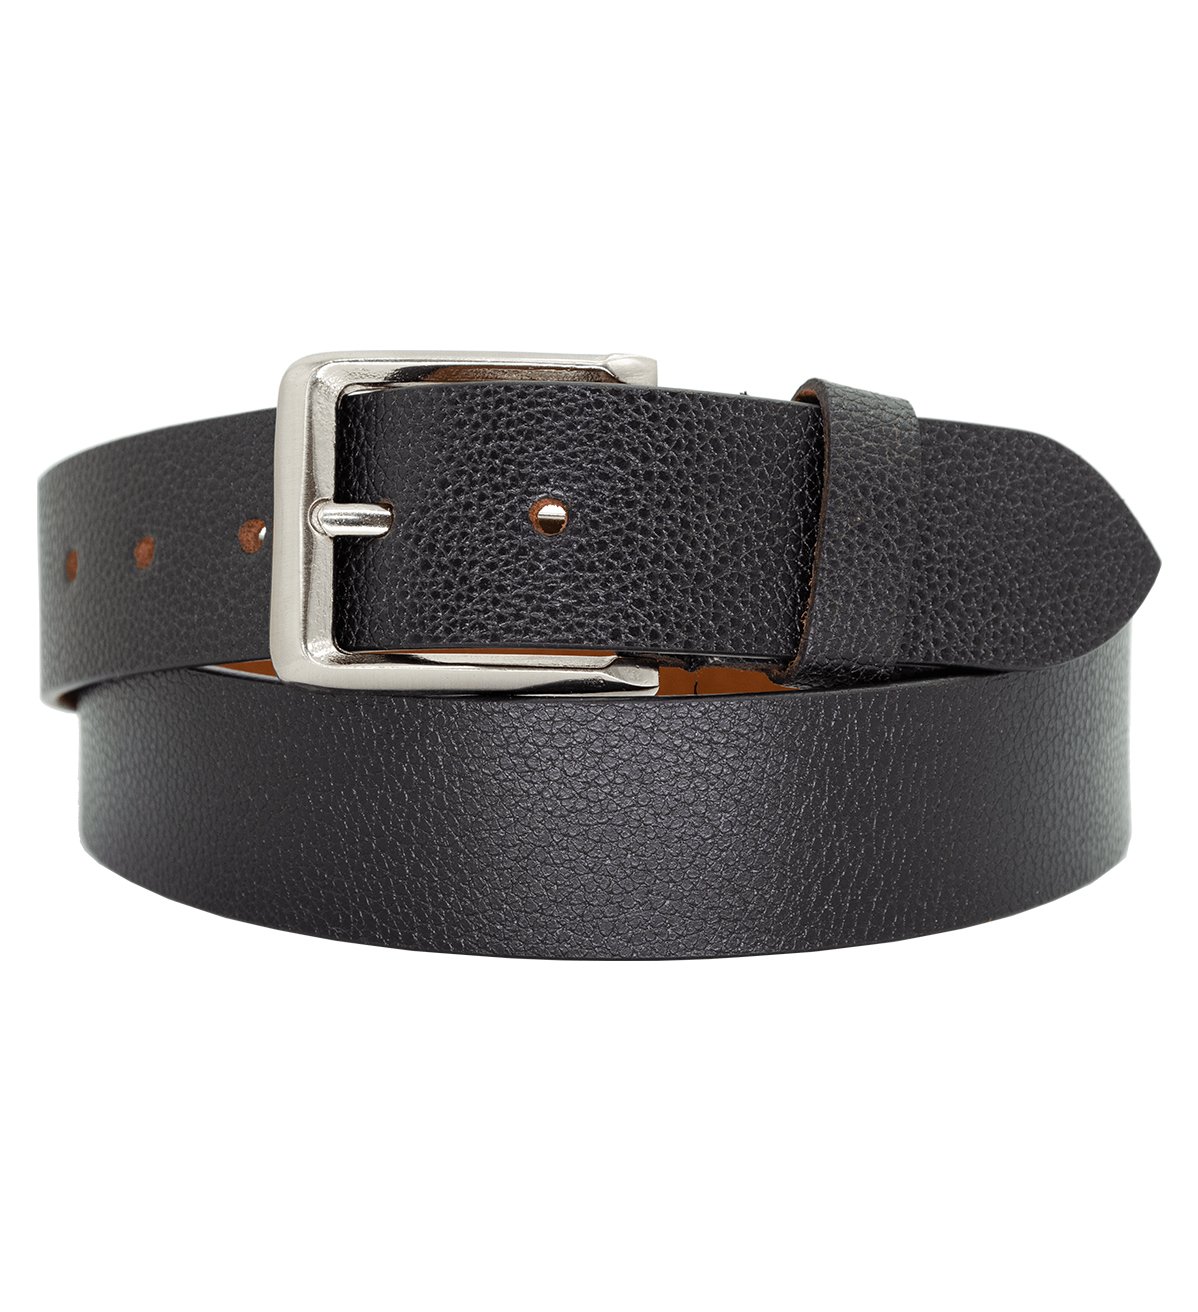 MACHO - Men's Leather Belt with Heavy Silver Buckle - #BT-814